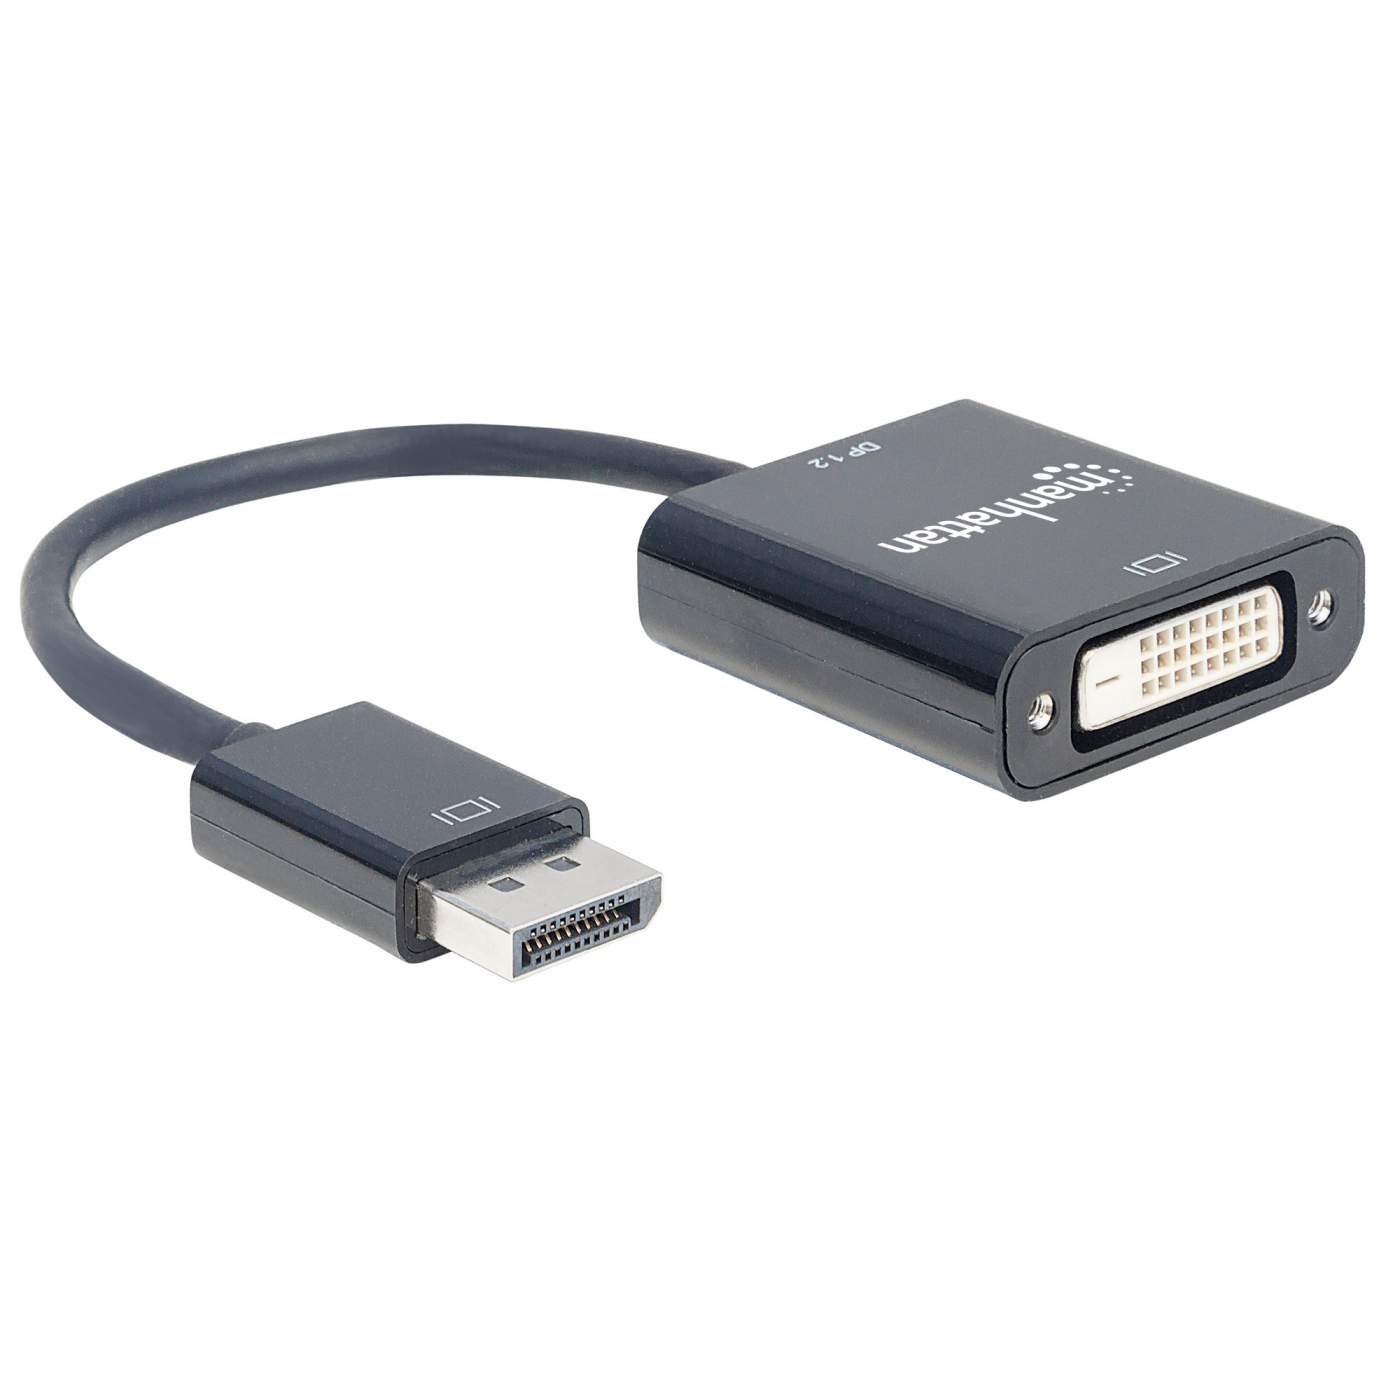 DisplayPort 1.2a to 4K HDMI Dual Link DVI VGA Passive Adapter 4 in 1 with  Audio